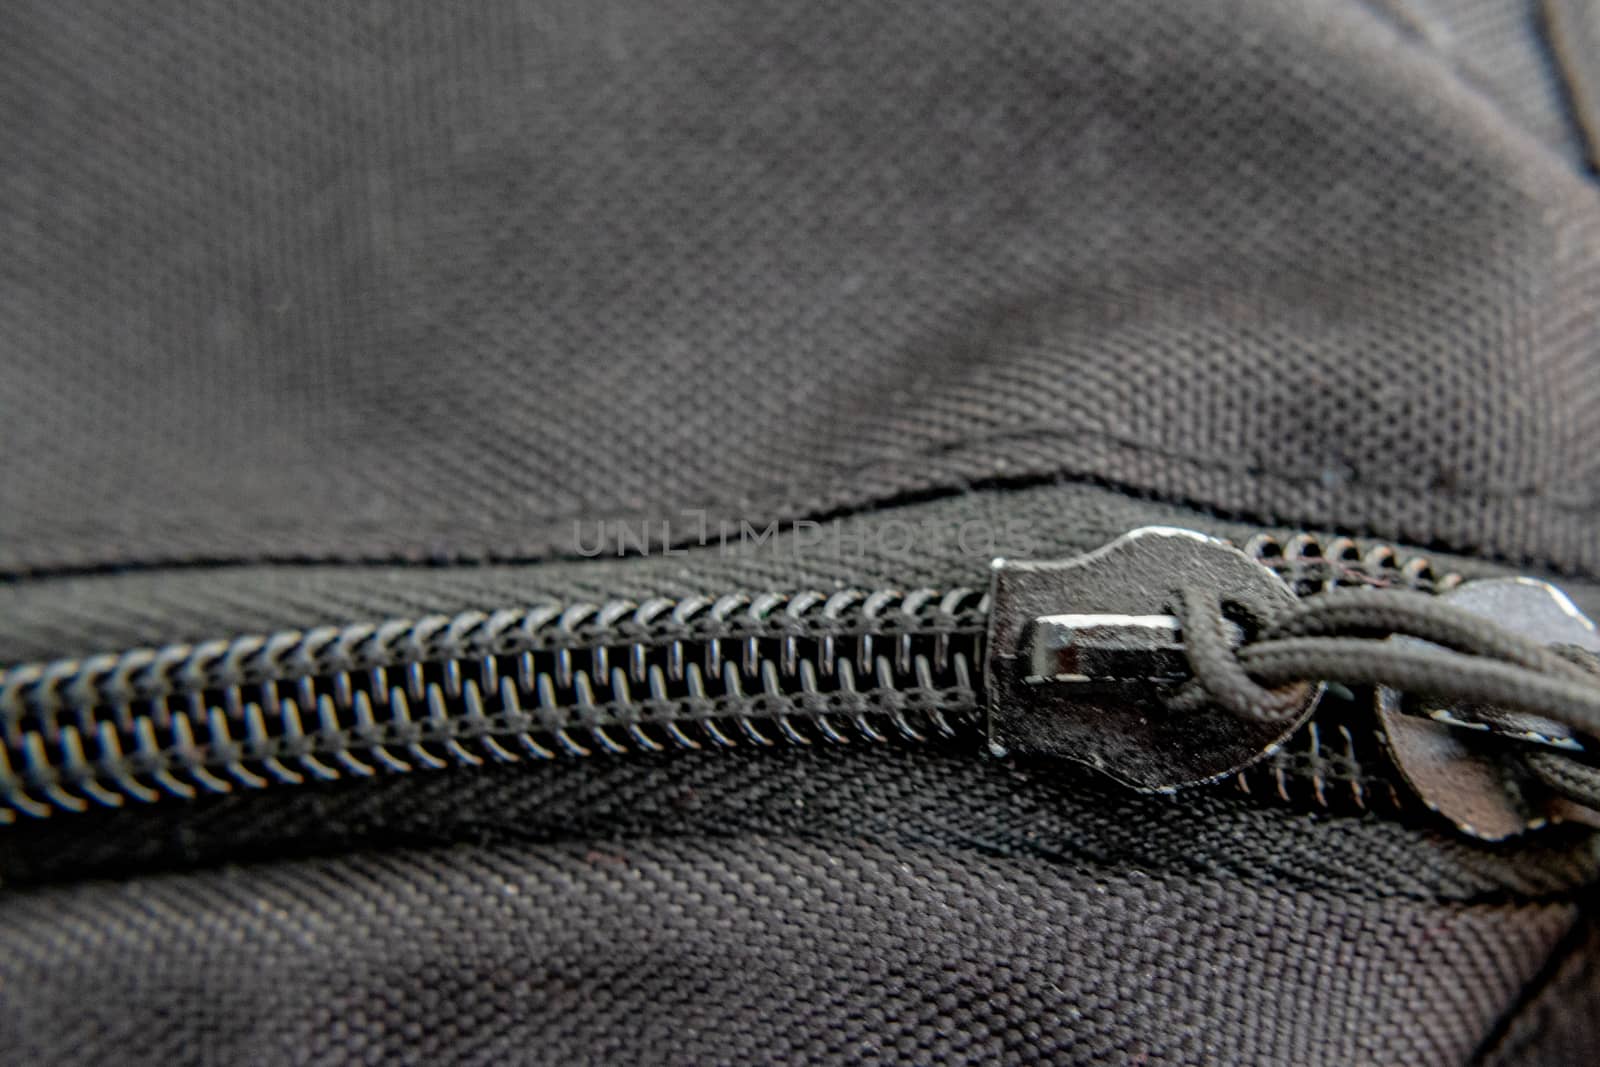 A close-up view of a black zipper shows the teeth and detail of its stitching into the fabric of a backpack.